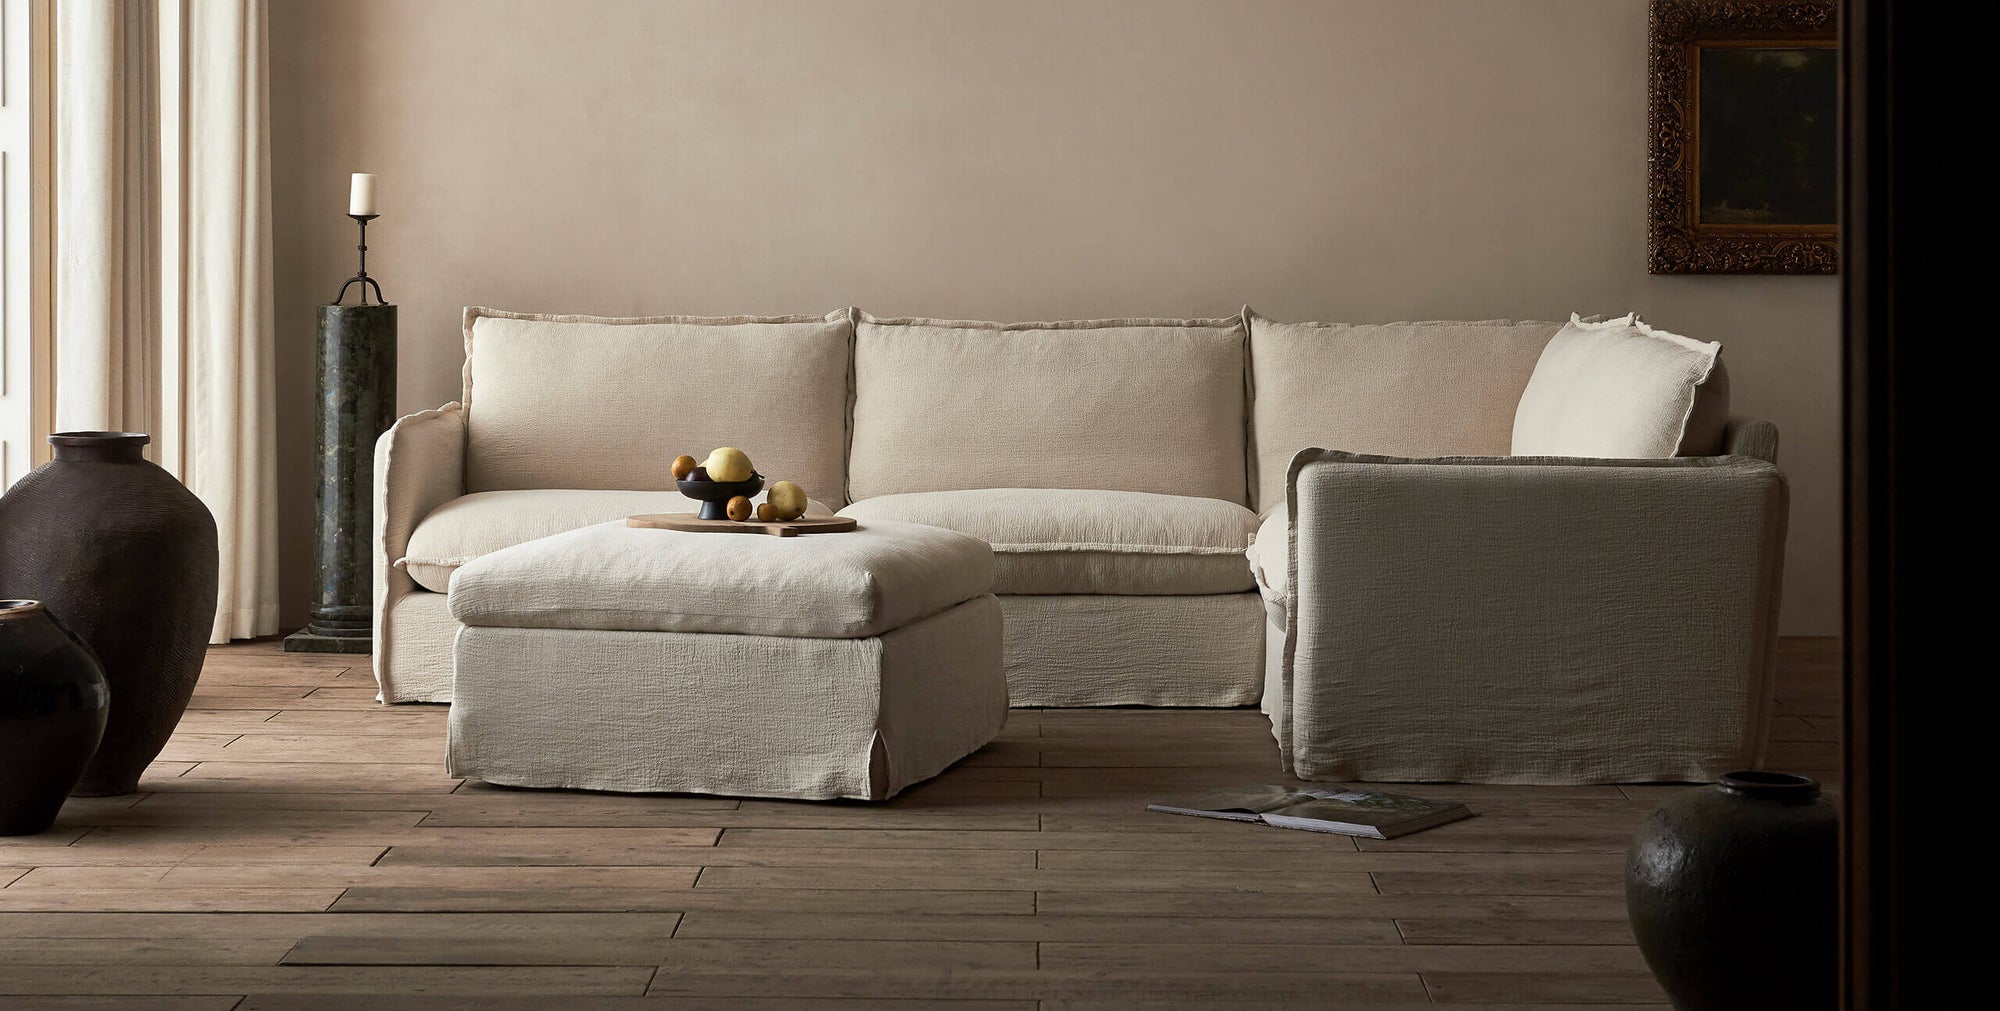 Esmé Storage Ottoman in Corn Silk, a light beige Washed Cotton Linen, in front of a Neva L-Shaped Sectional